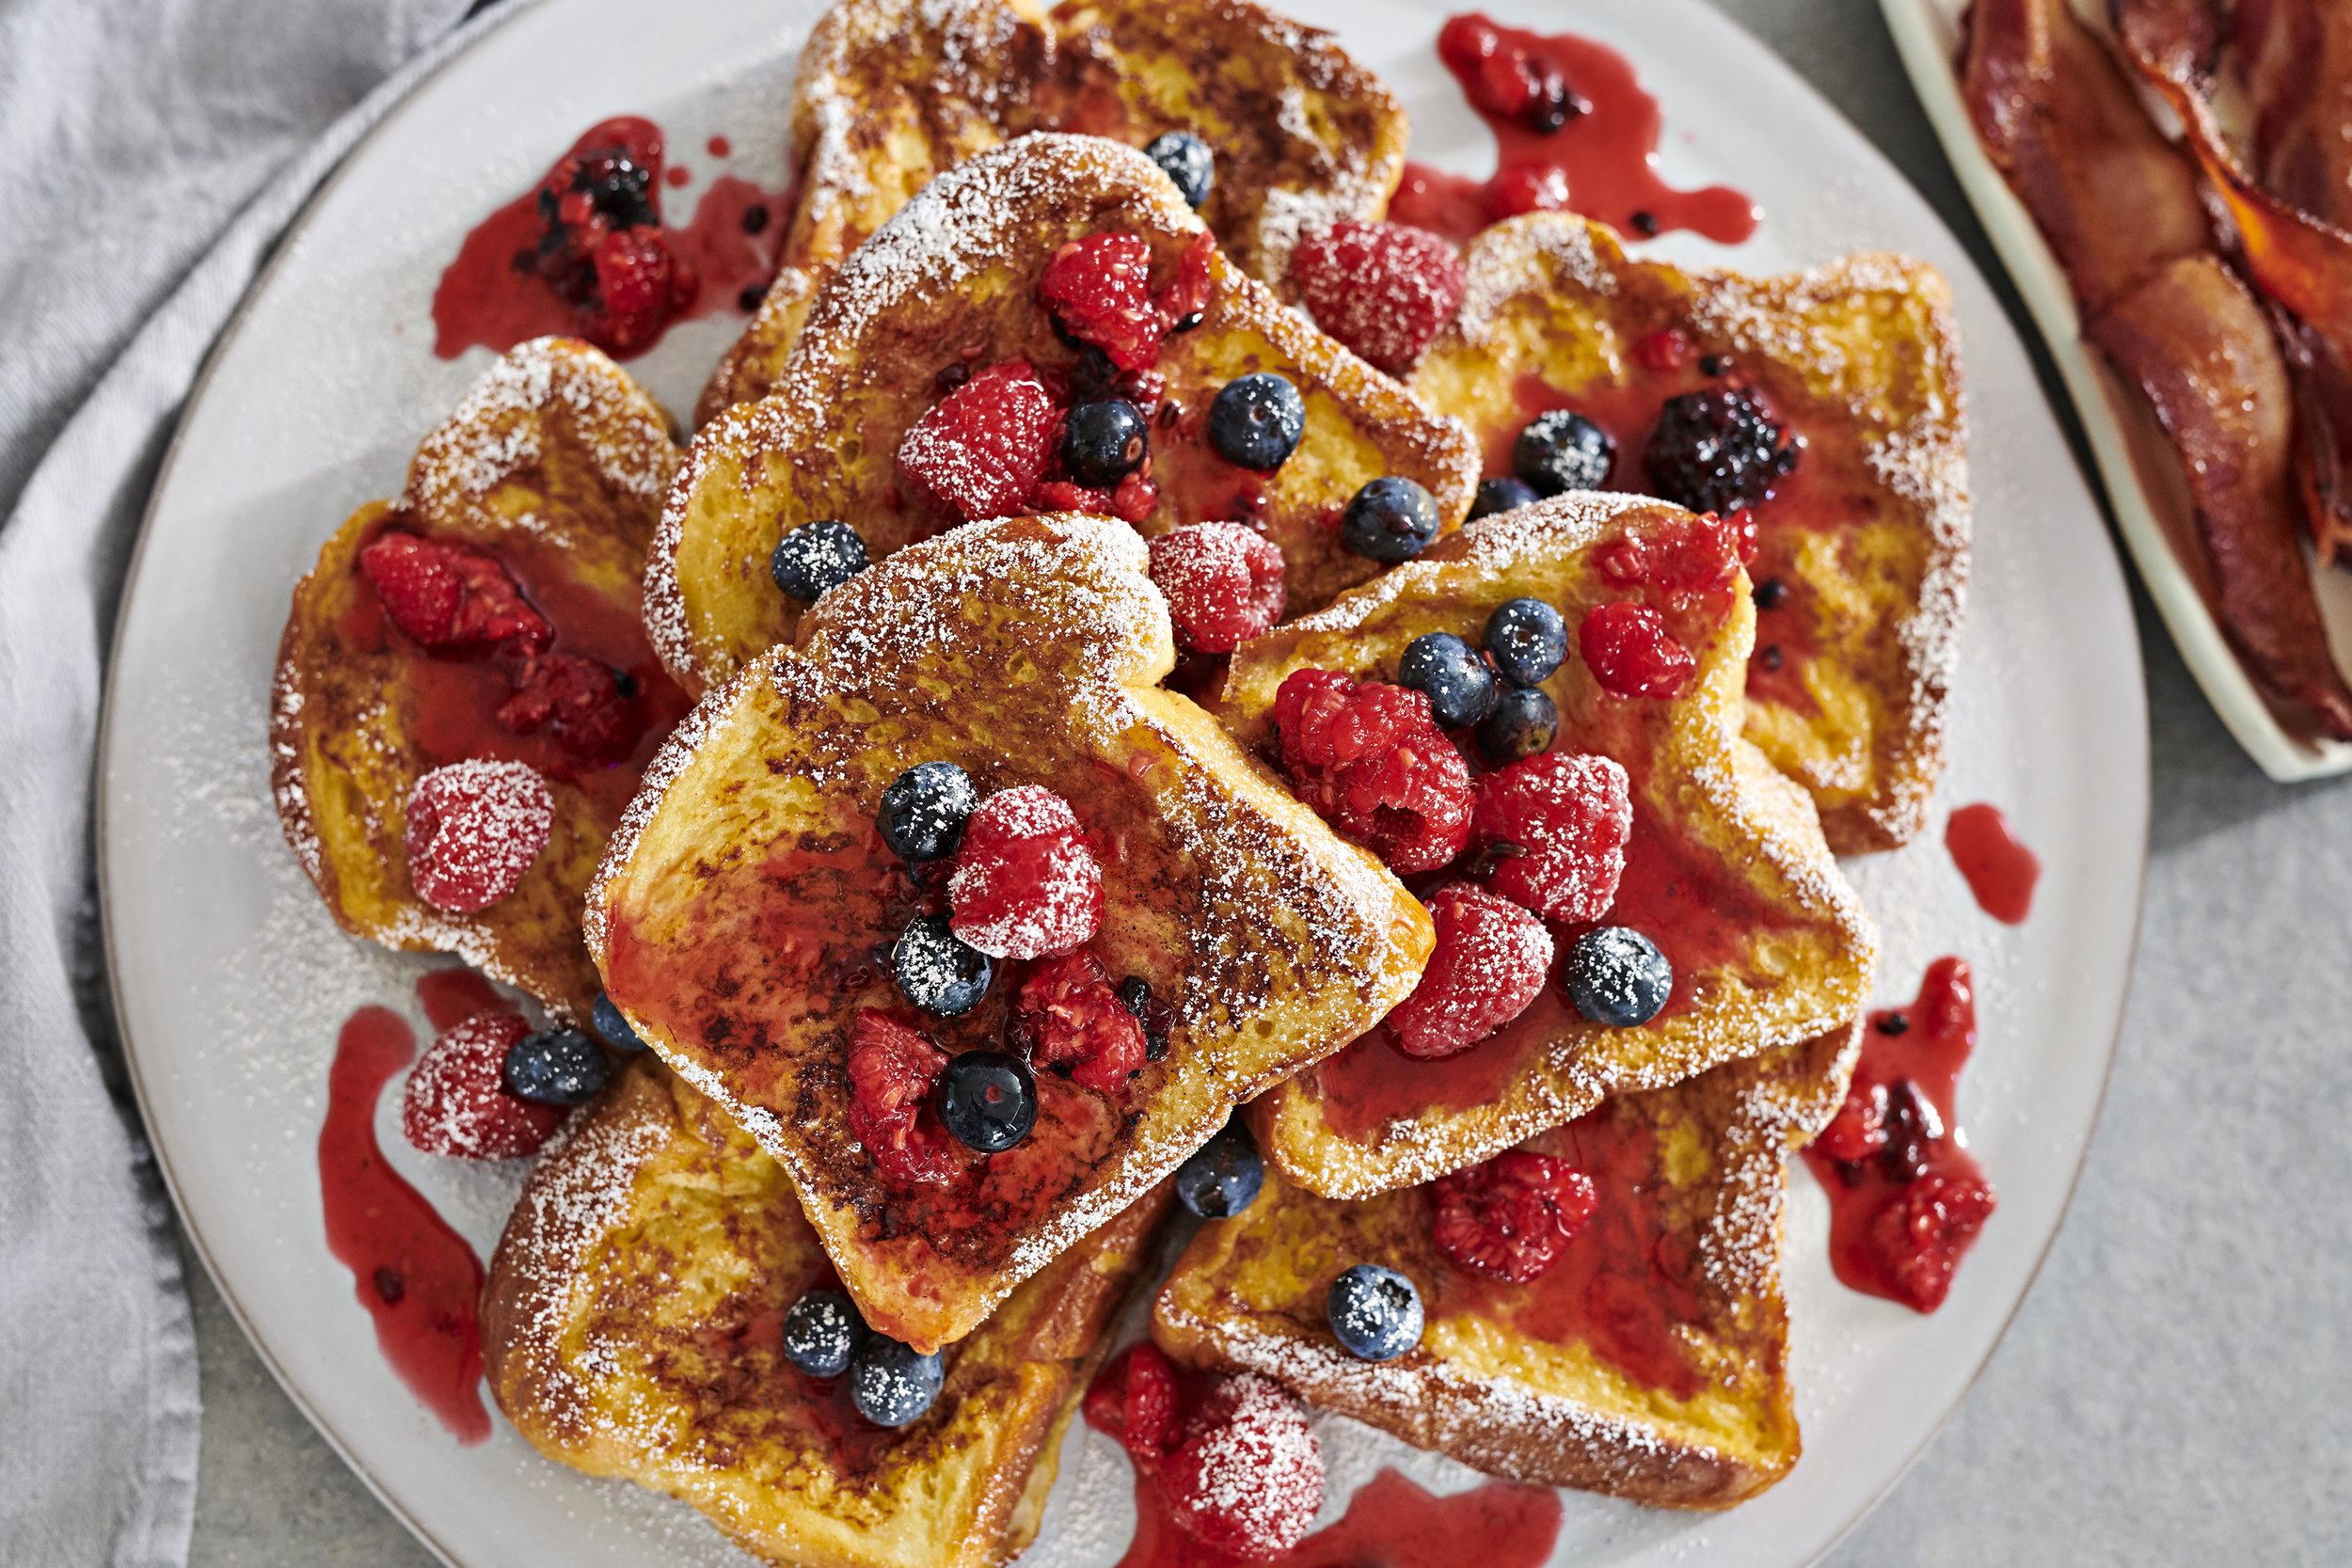 Cinnamon French Toast with Berries and Powdered Sugar